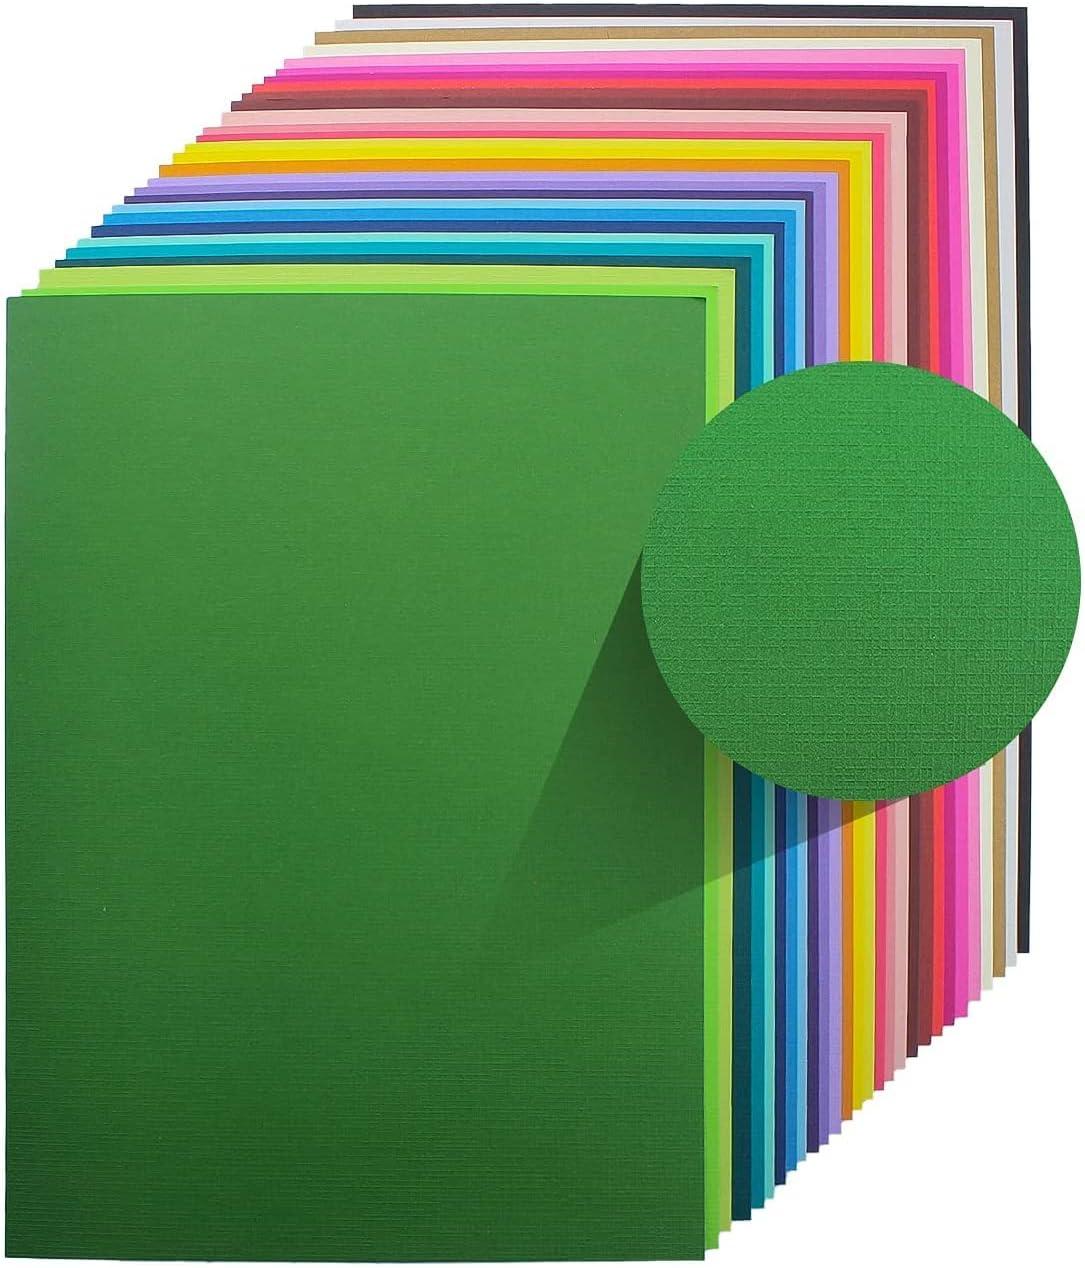 60 Sheets Textured Colorful Card Stock 28 Multicolor Cardstock 250gsm Faint  Texture Single-Sided Printed Colored Paper for Card Making Scrapbooking  Craft Kids